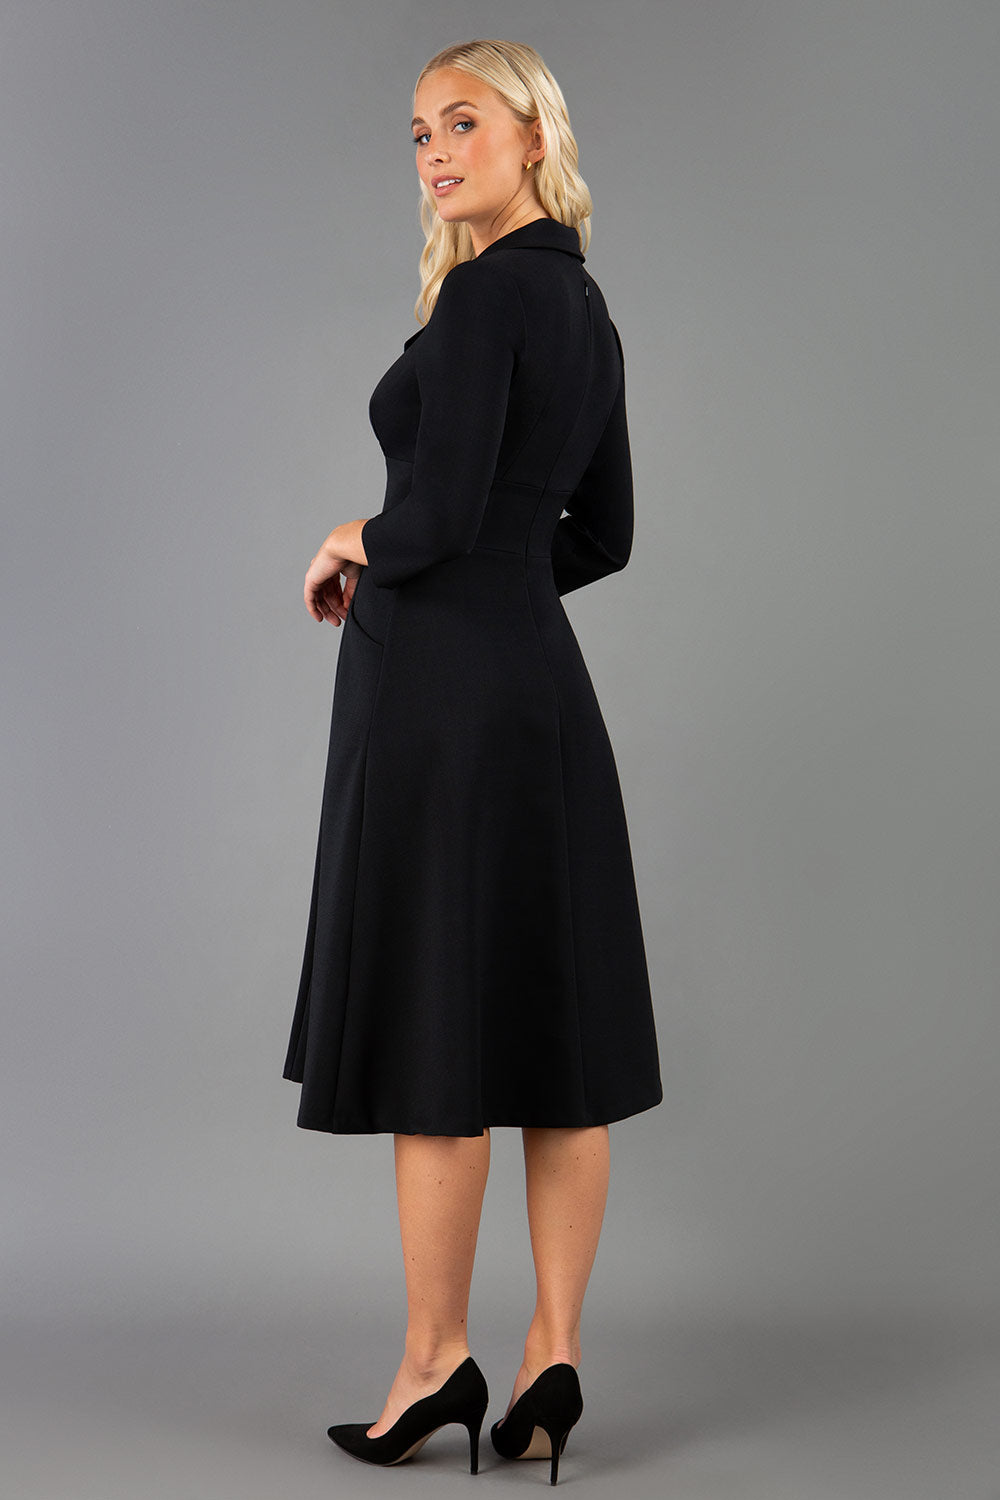 A blonde model is wearing a swing black three quarter sleeve dress with oversized collar and pockets in the skirt  